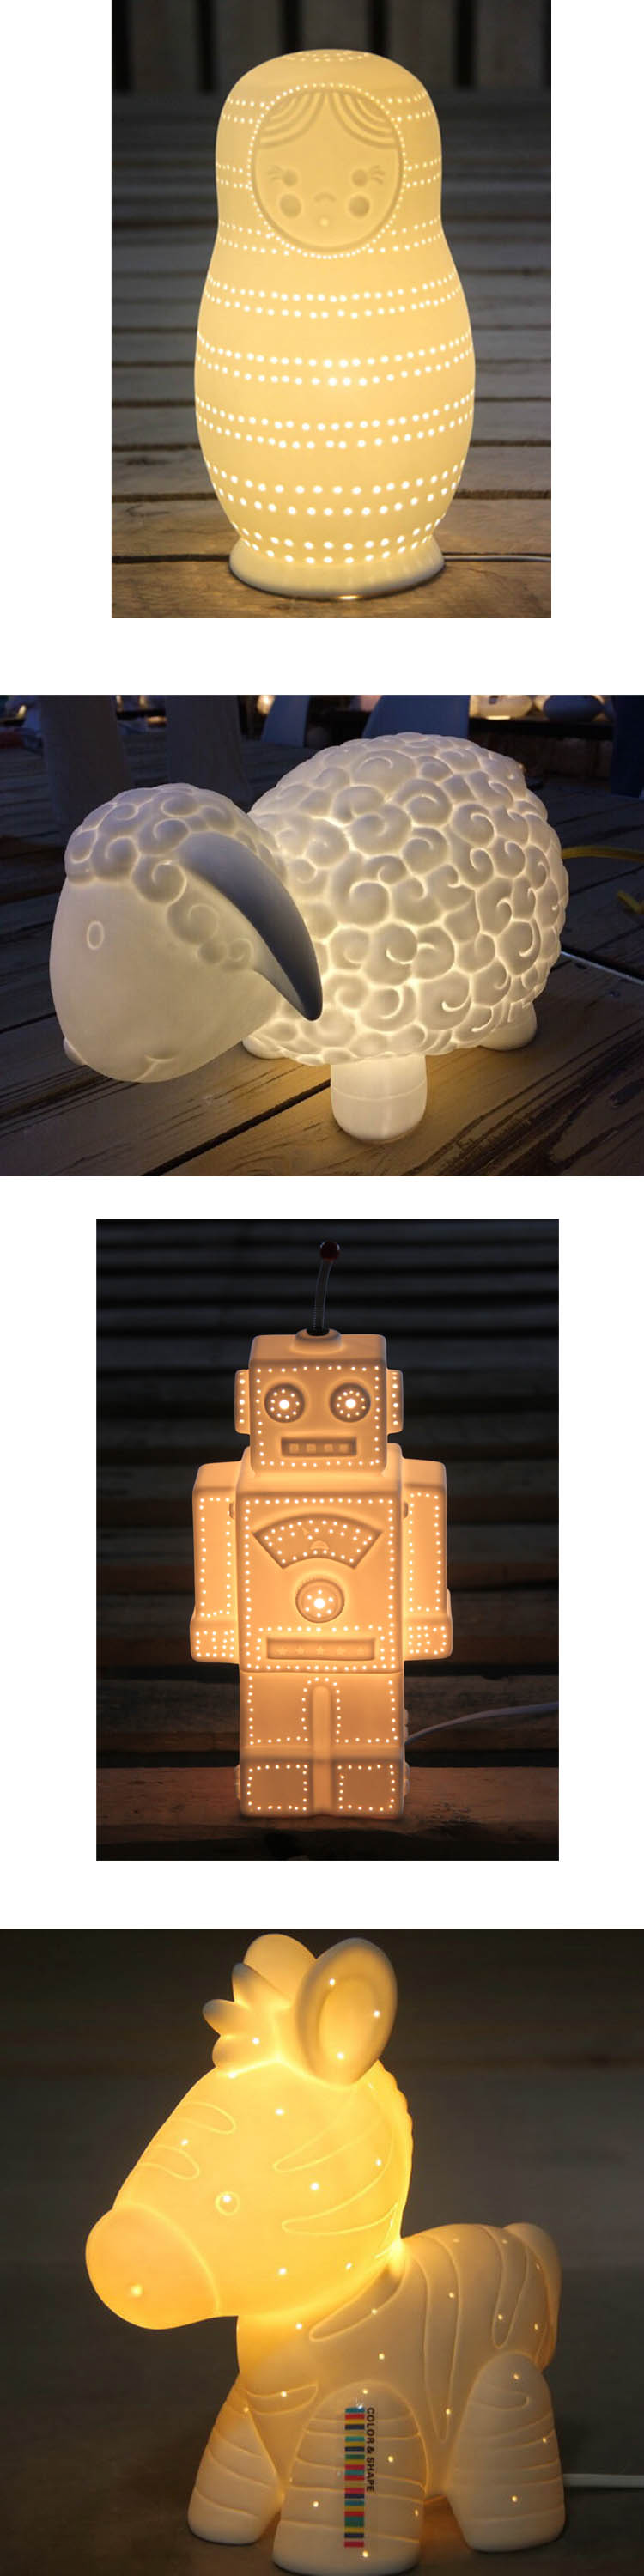 Gift gift wholesale ceramic table lamps high quality lovely doll shape bedside porcelain table lamp night light